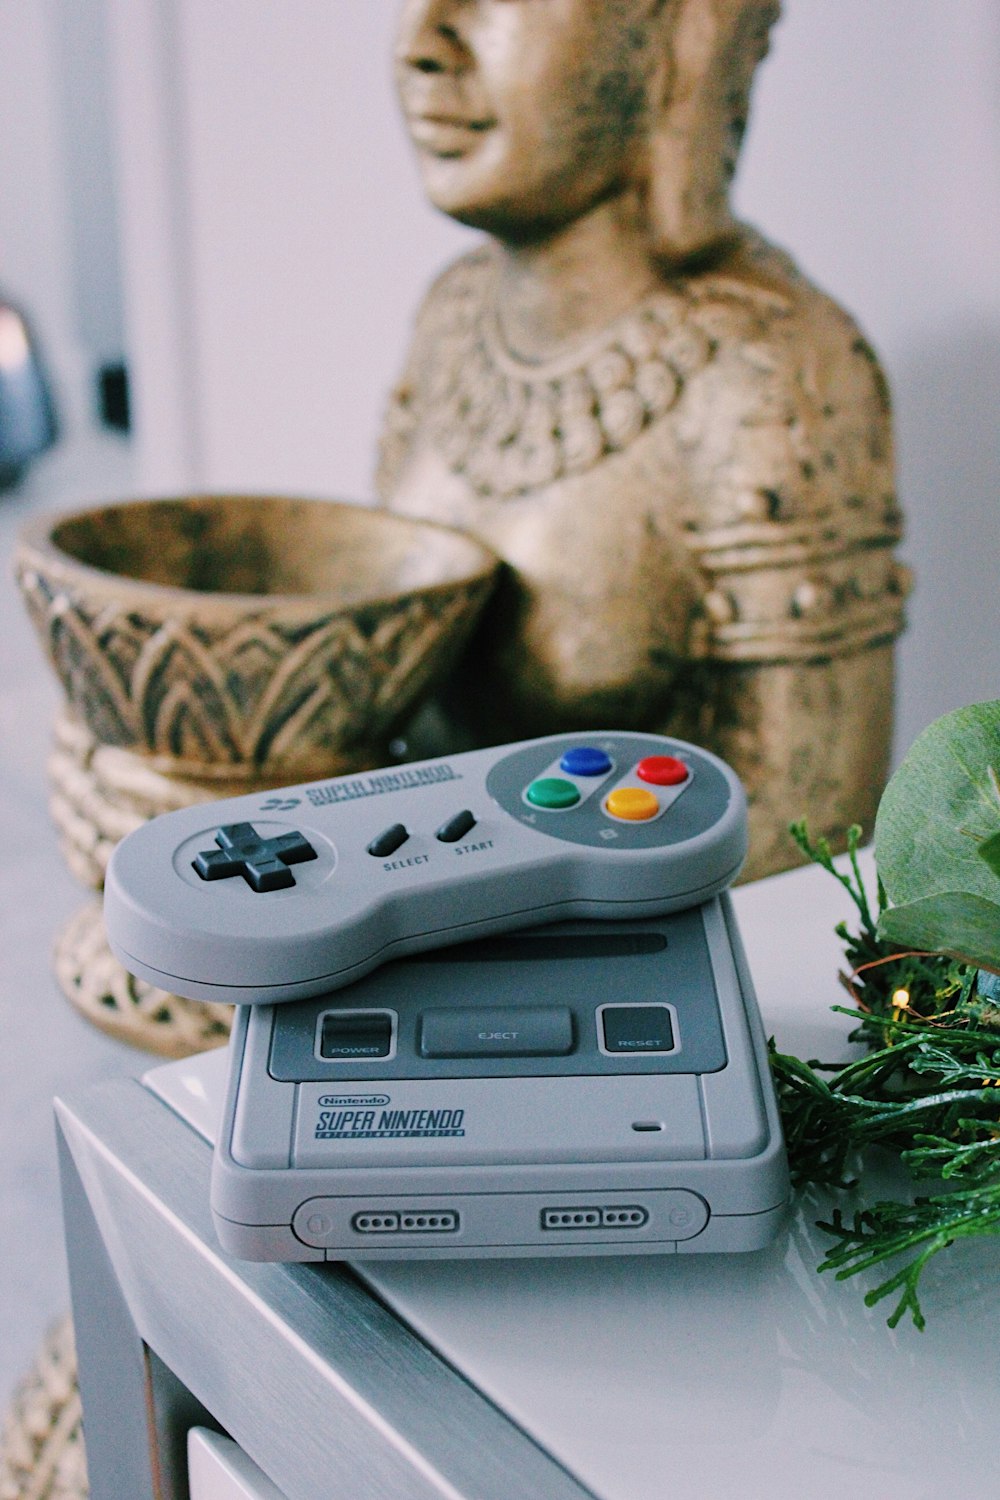 gray Super Nintendo game console with controller on table